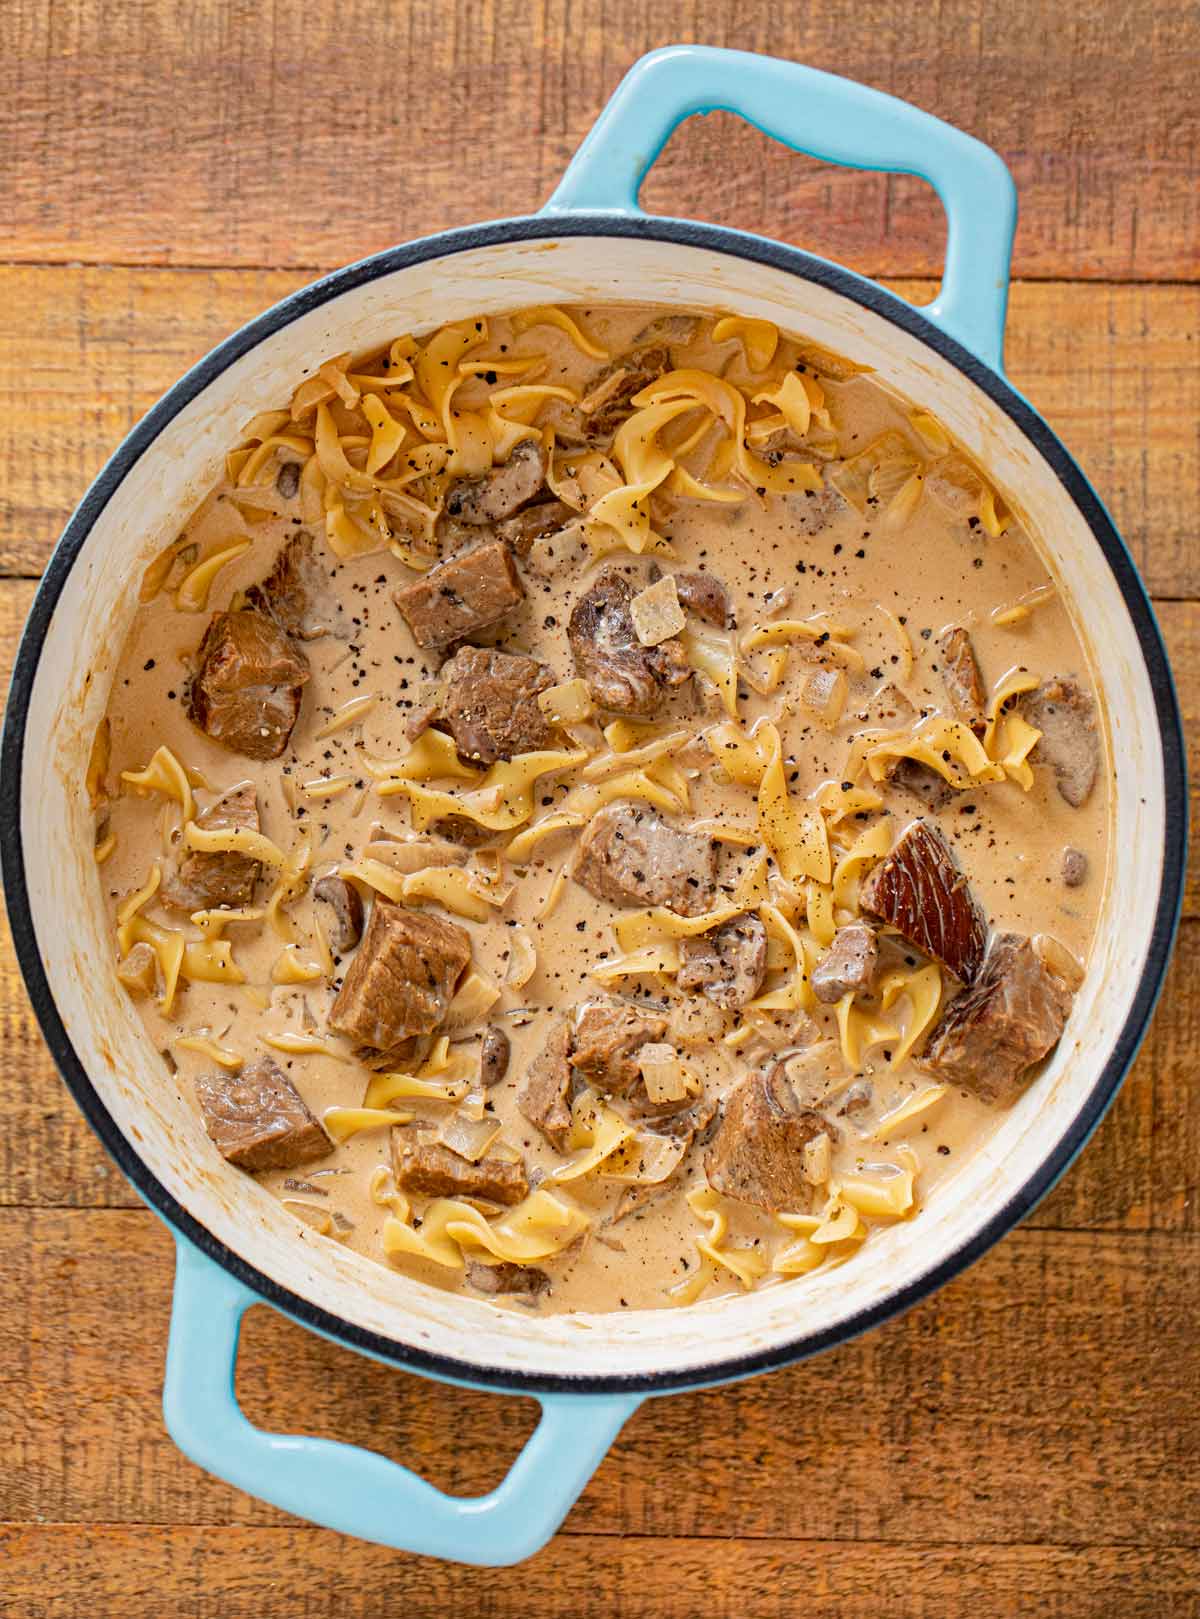 1:6 beef SroganoffWbeef chunks,noodles in a cream sauce.Your choice of clear bowls or green bowls in 2 sizes.Barbie foodBarbie kitchen